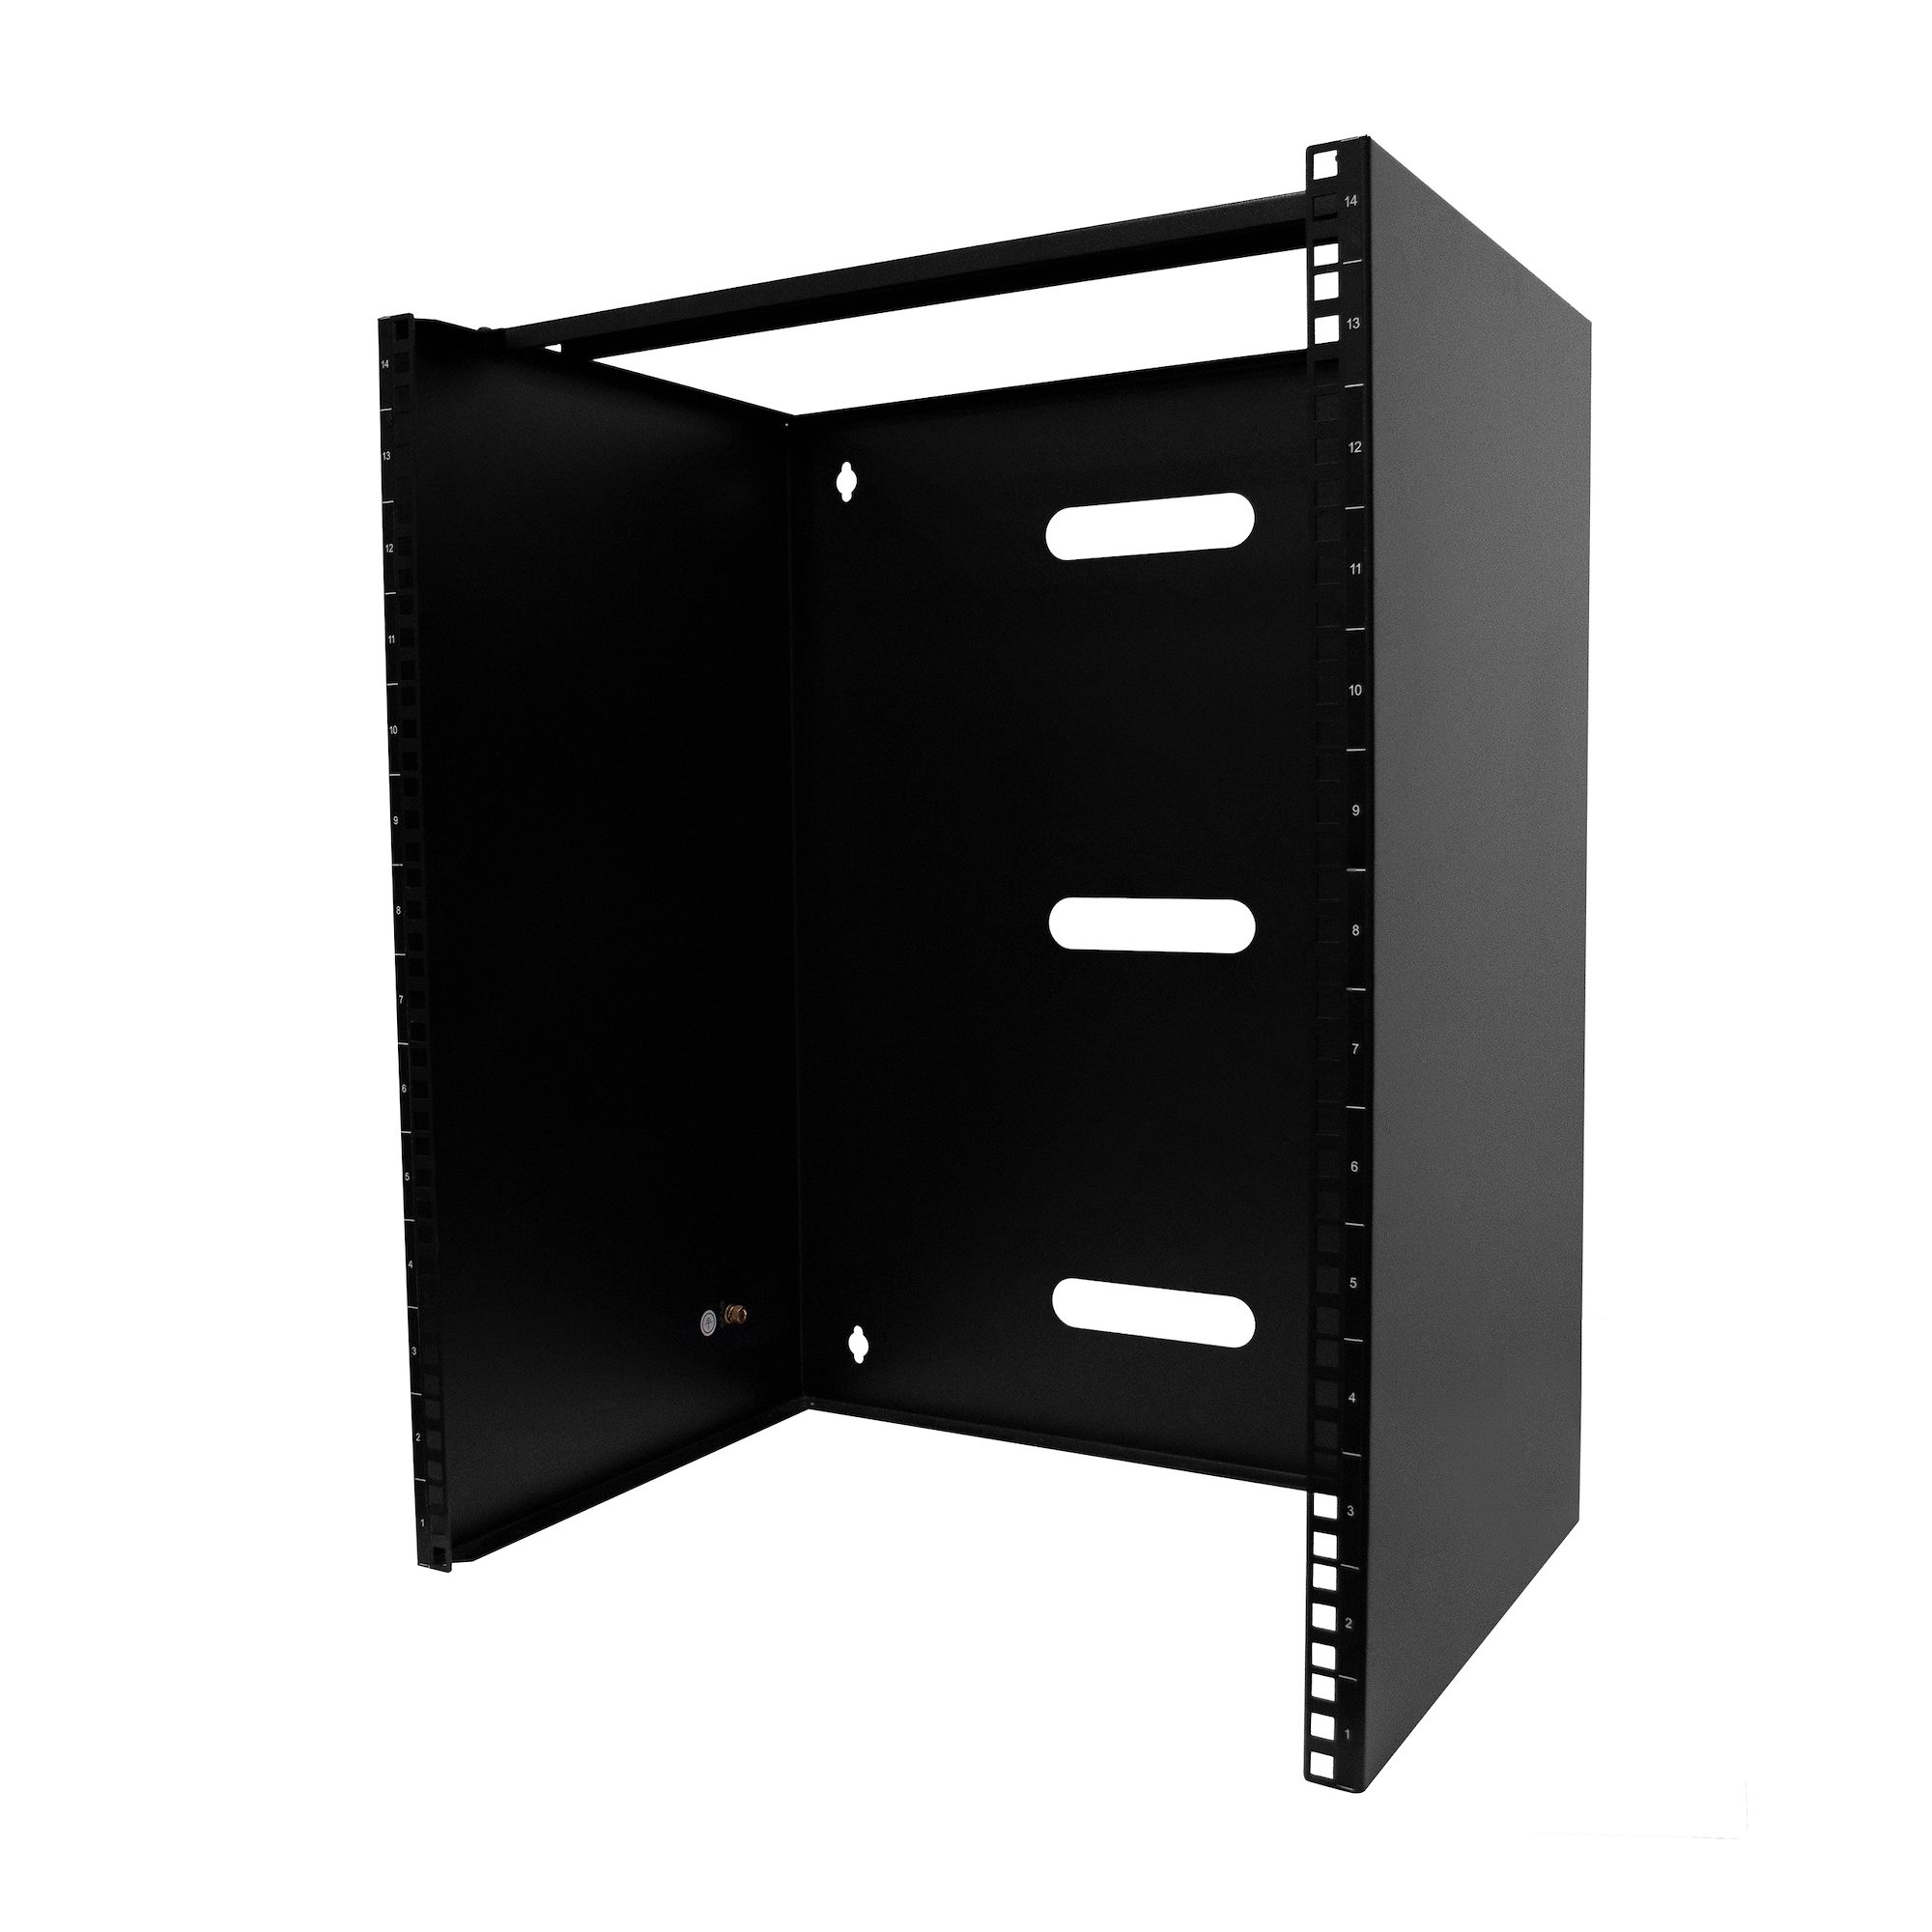 14U Wall Mount Network Rack - 14 (35.5cm) Deep (Low Profile) - 19 Patch  Panel Bracket for Shallow Server, IT Equipment, Network Switches 